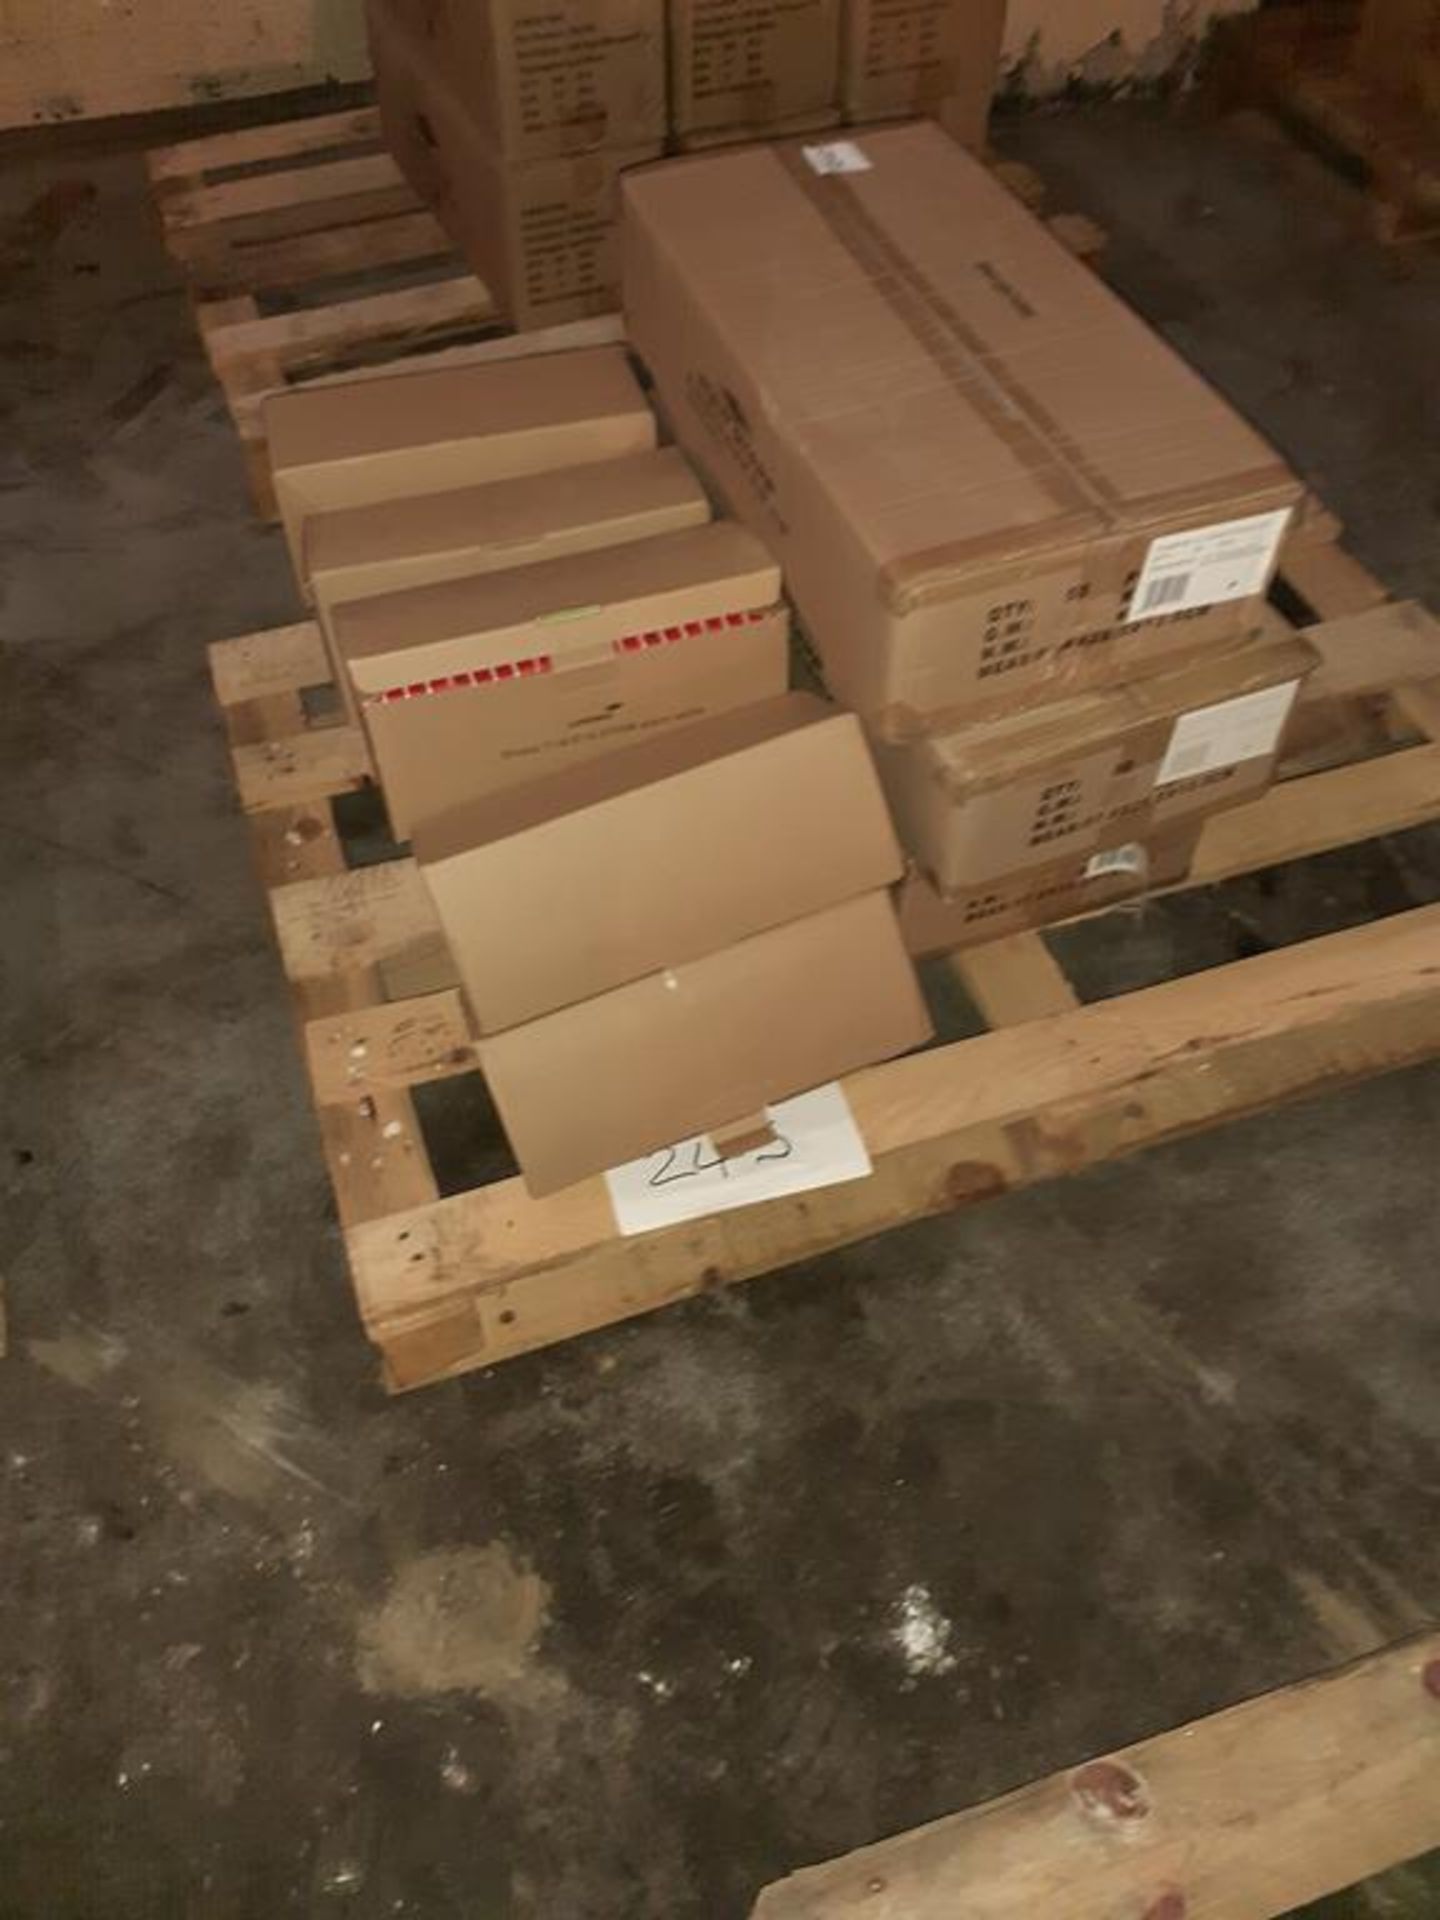 3 x boxes of Lumineux